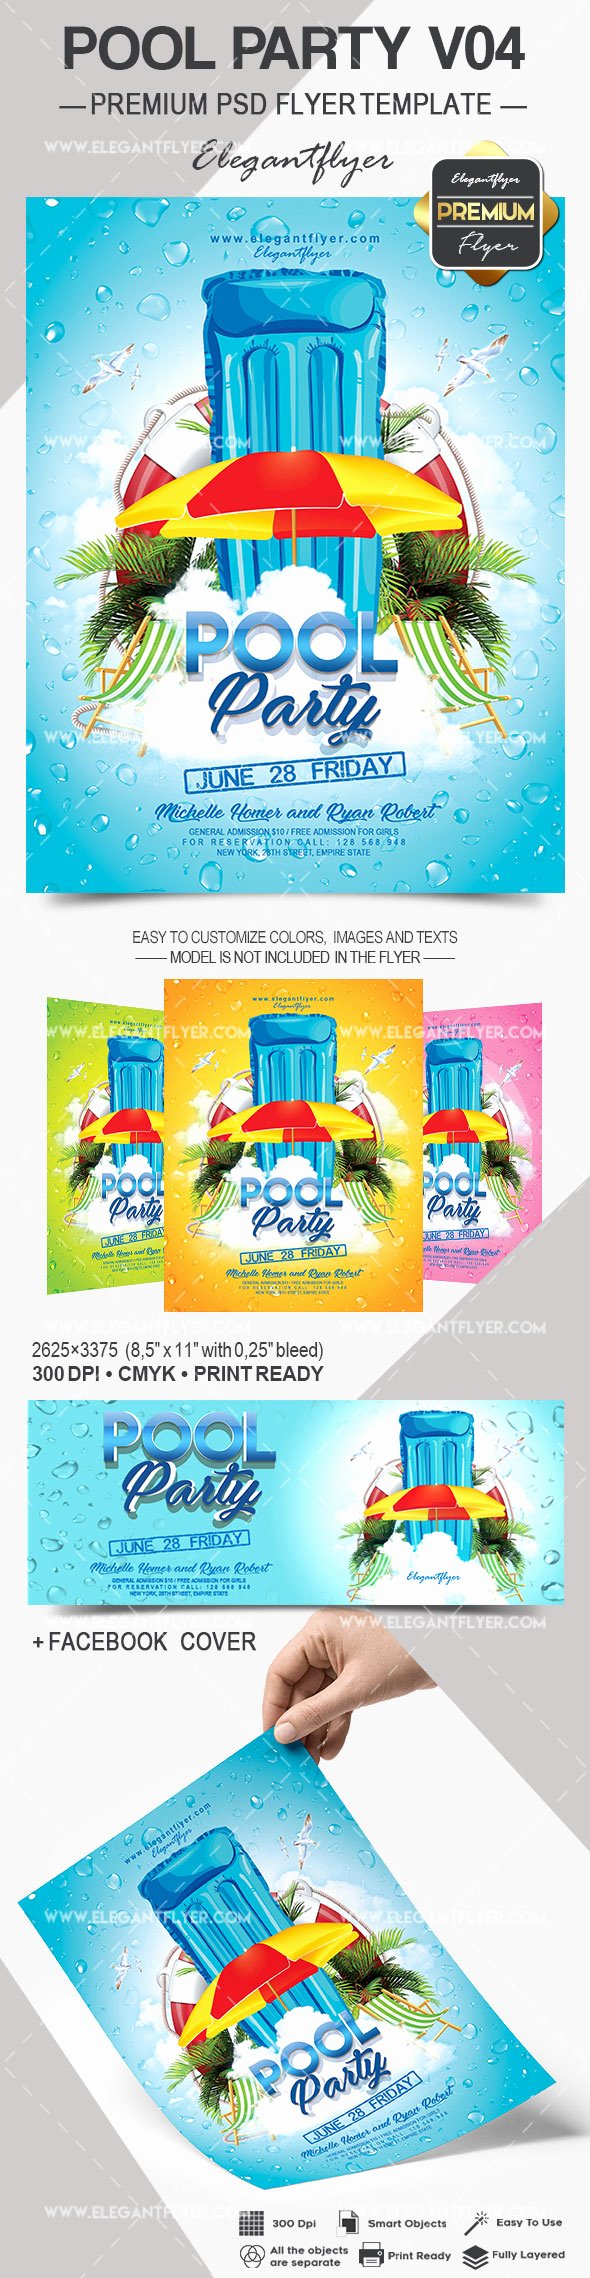 Pool Party Flyer Templates Free Beautiful Pool Party V04 – Flyer Psd Template – by Elegantflyer